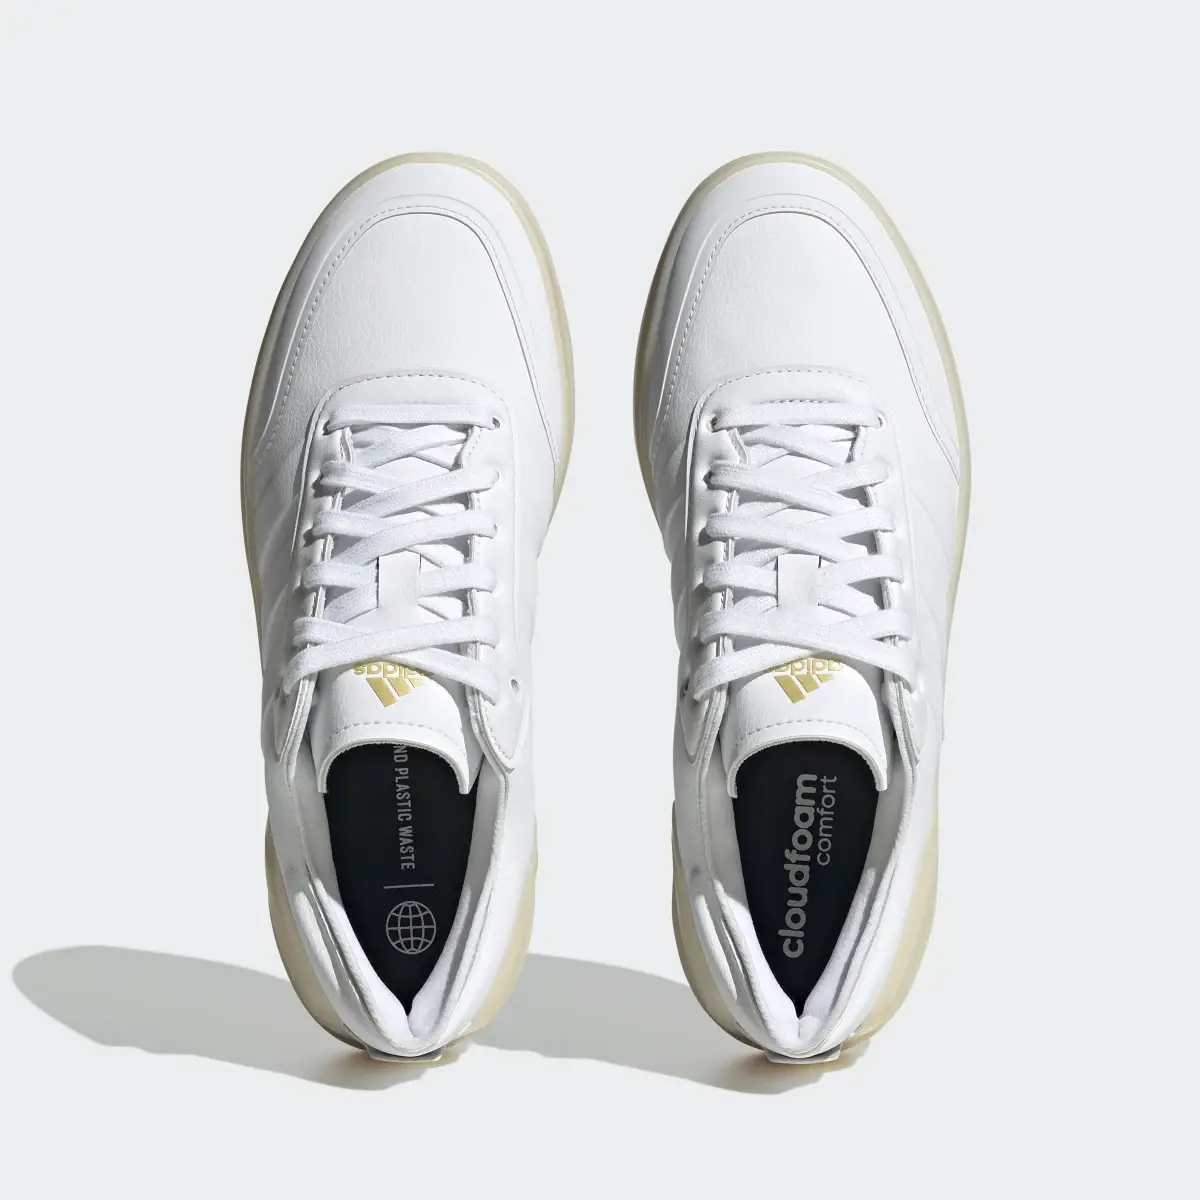 Adidas Court Revival Modern Shoes. 3